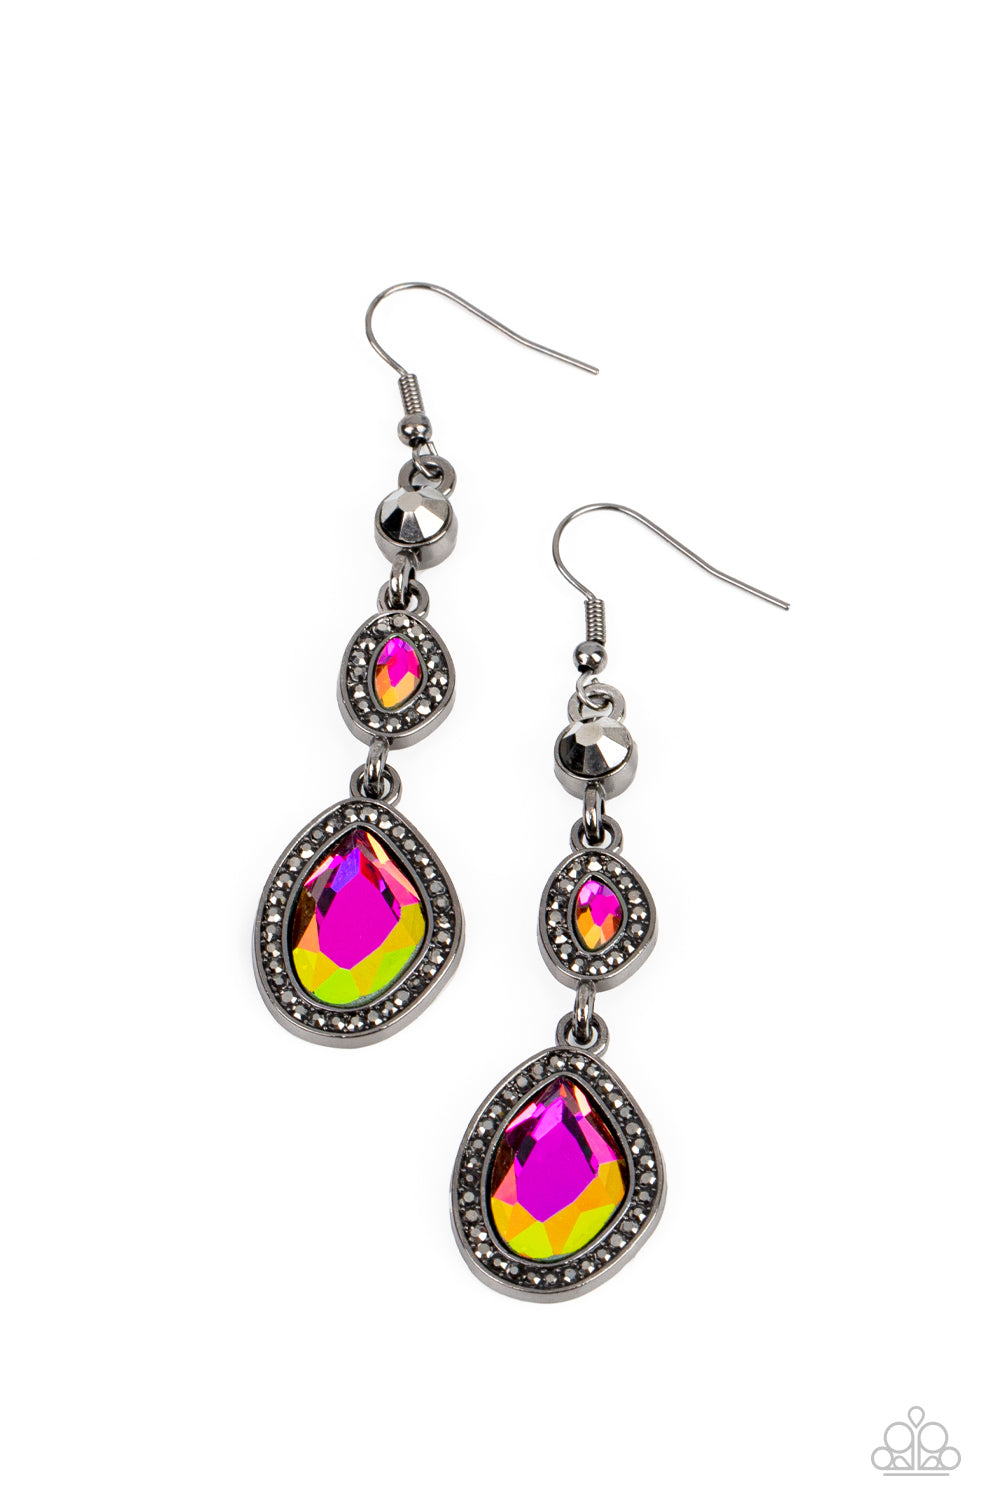 Dripping Self-Confidence - Multi Paparazzi Earrings